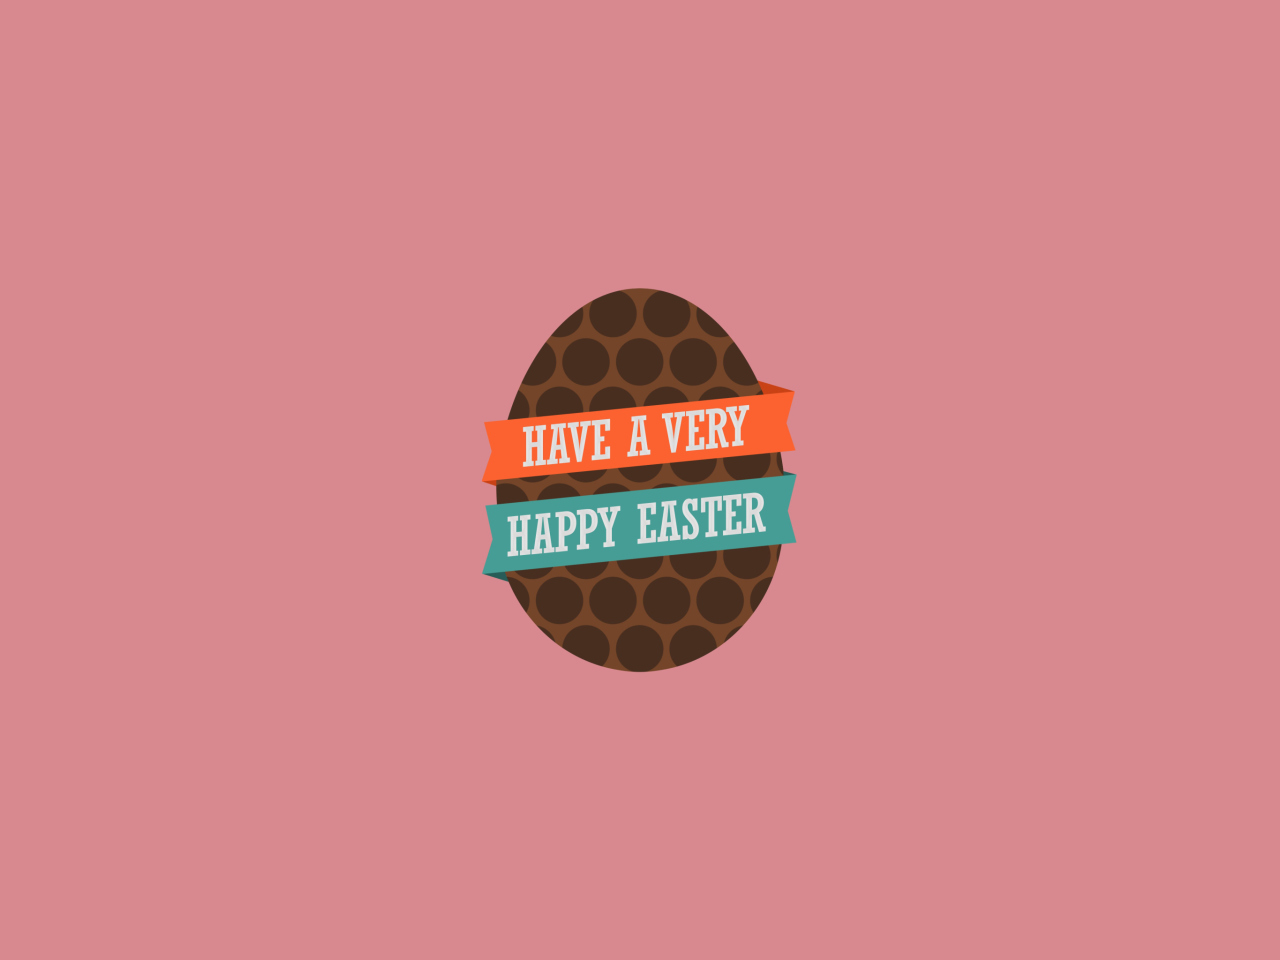 Very Happy Easter Egg wallpaper 1280x960